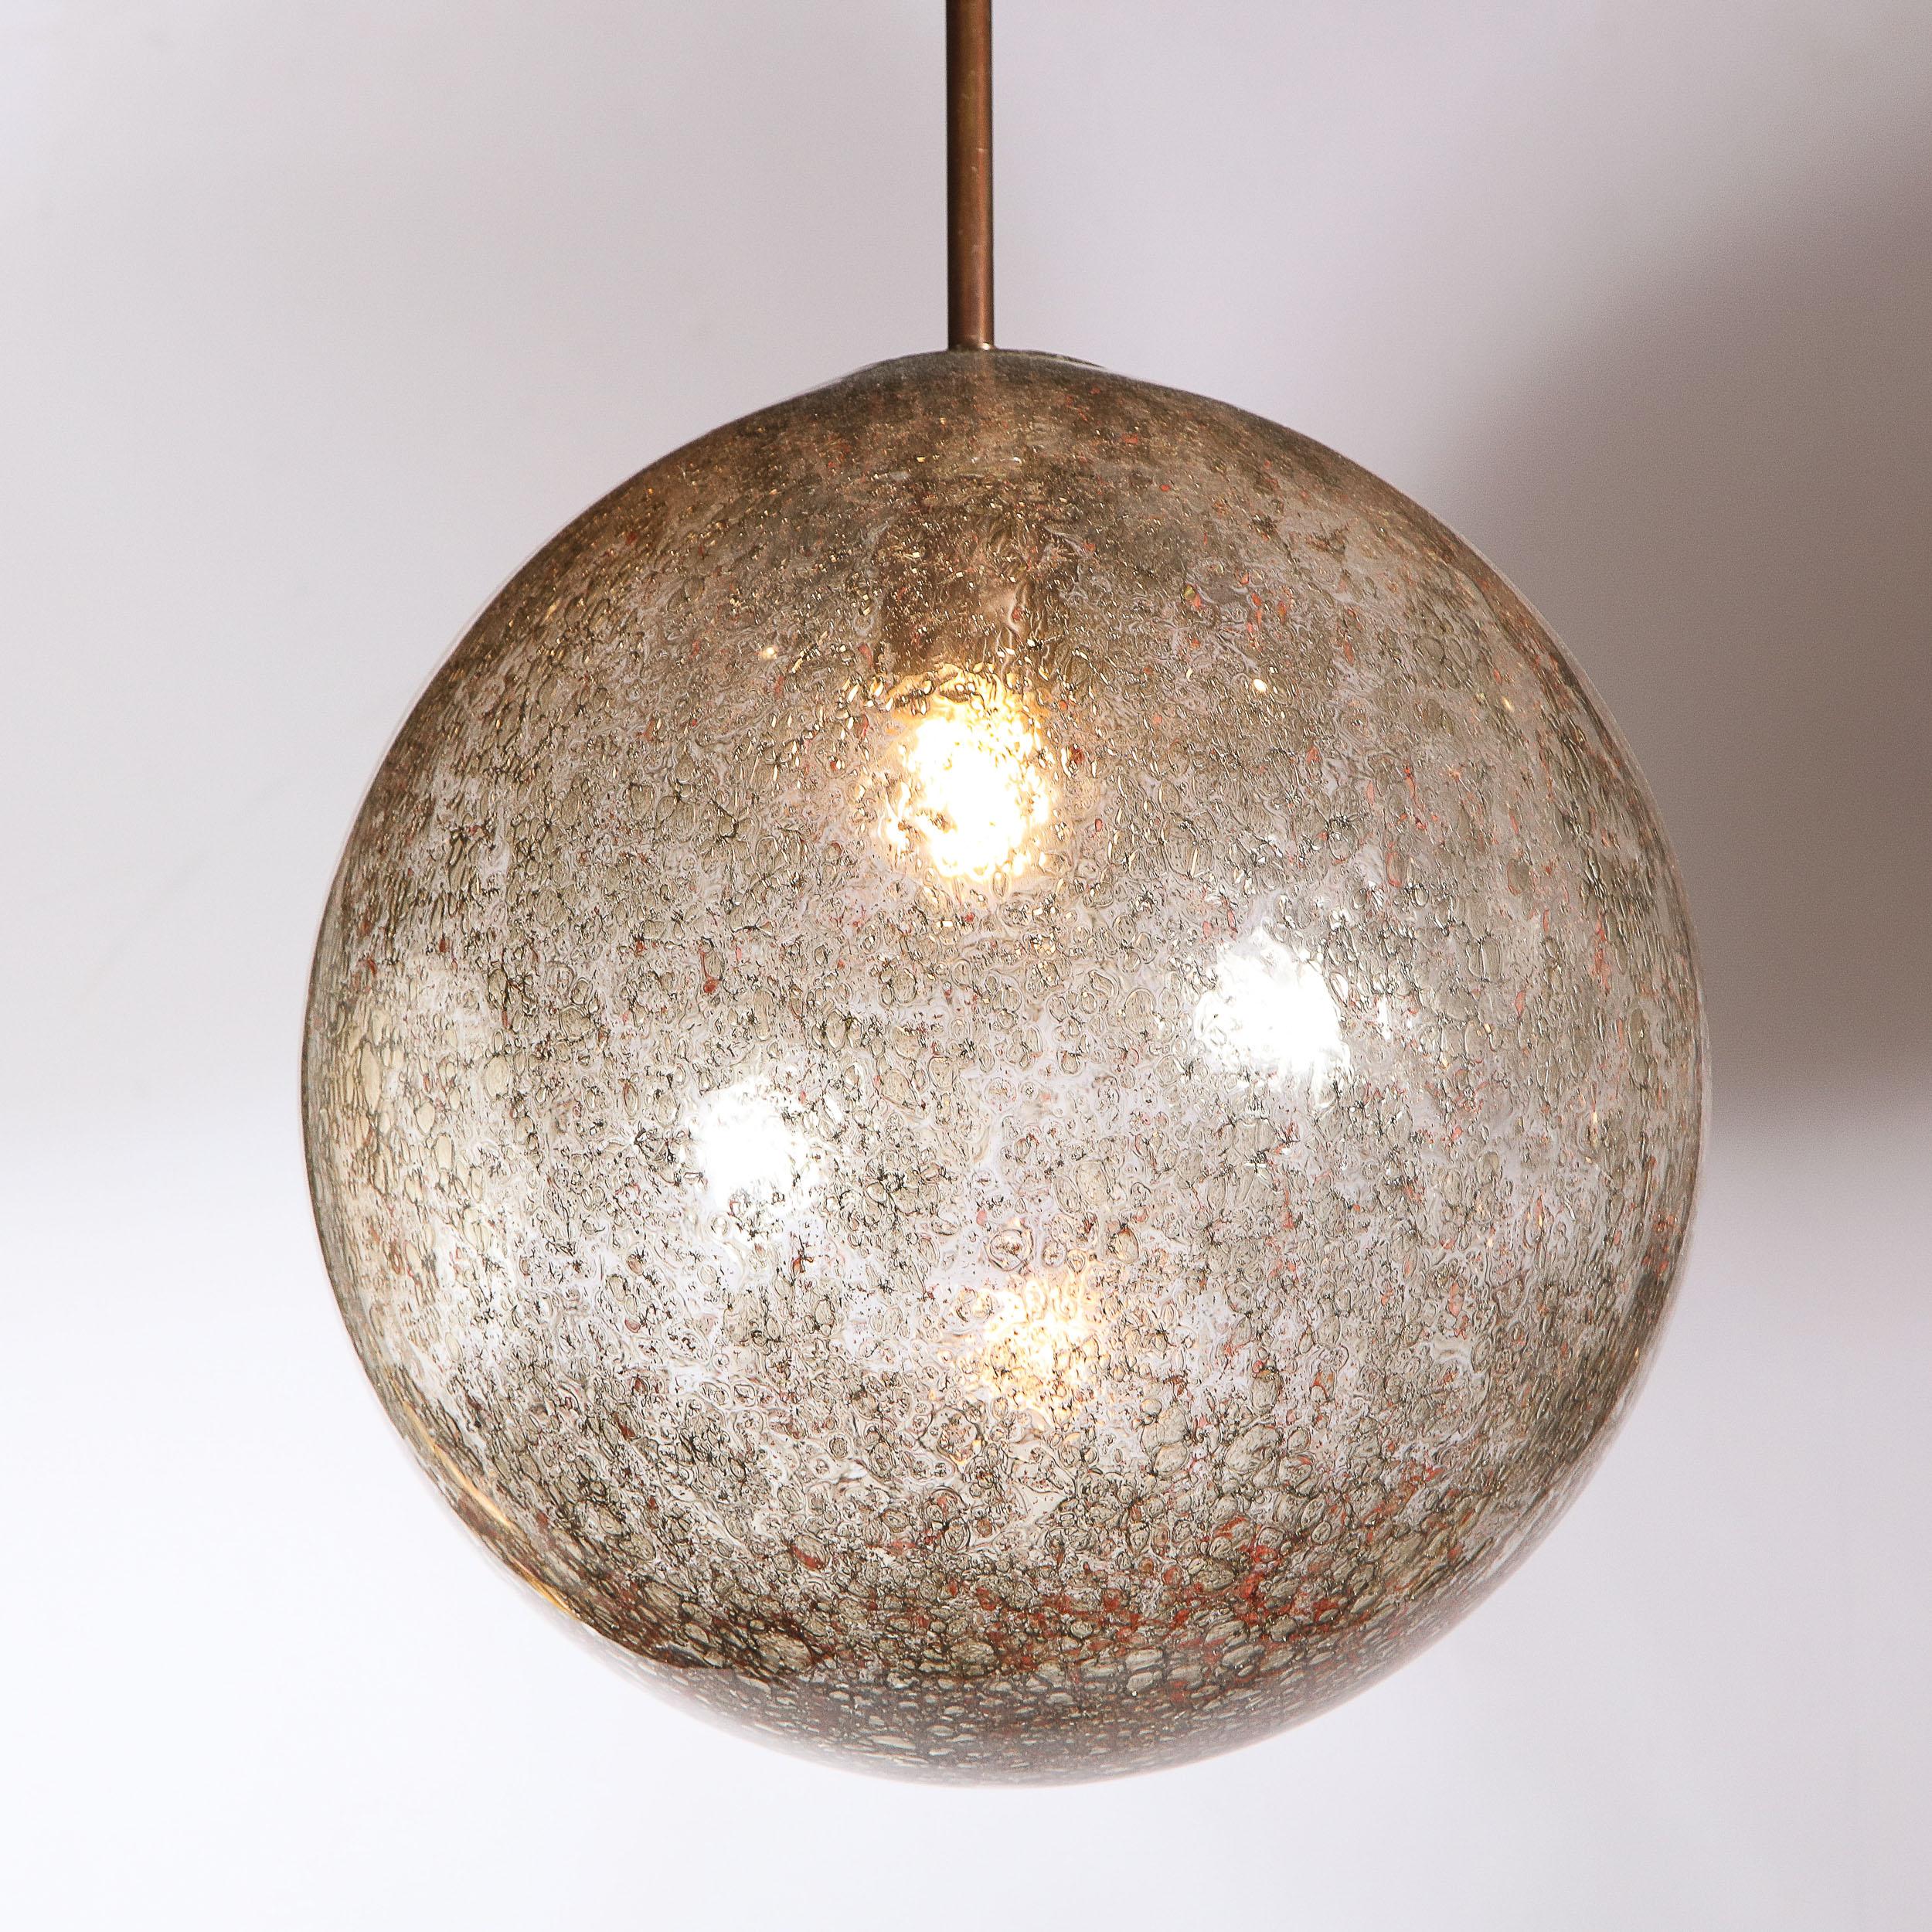 This stunning modernist pendant was realized in Murano, Italy - the island off the coast of Venice renowned for centuries for its superlative glass production. It features a spherical bodie in translucent Murano glass with a wealth of organic smoked